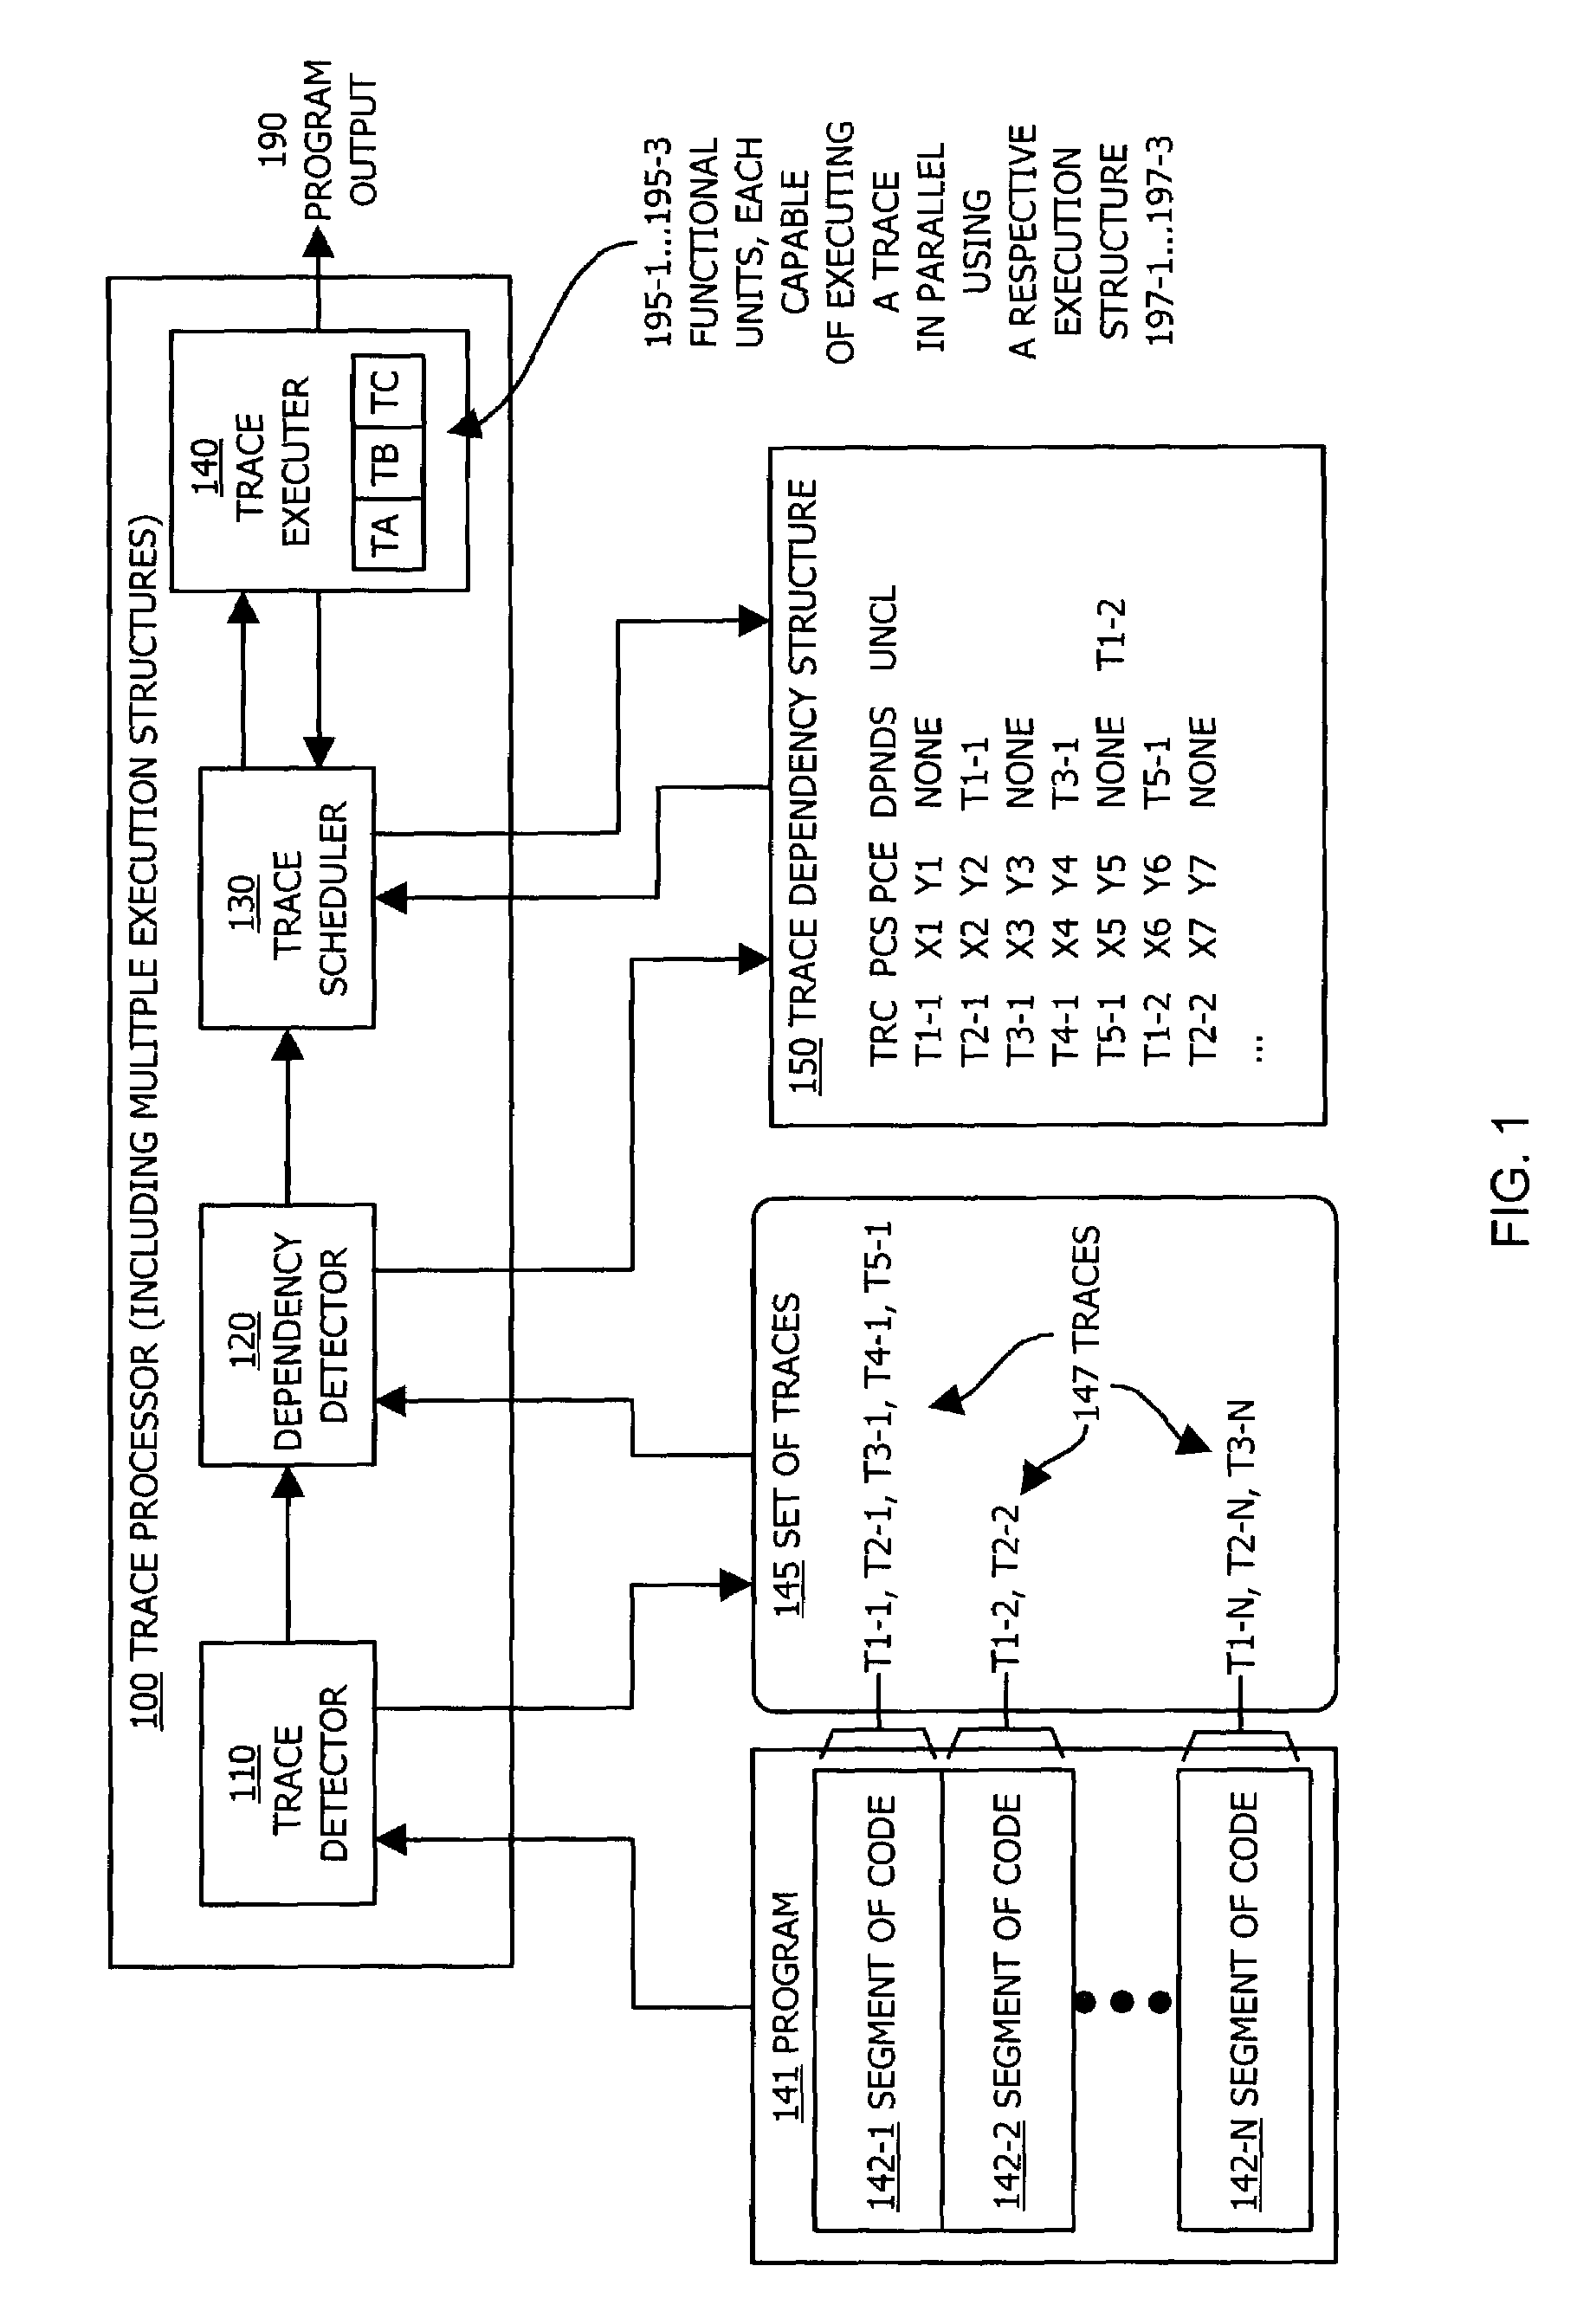 Methods and apparatus for executing instructions in parallel